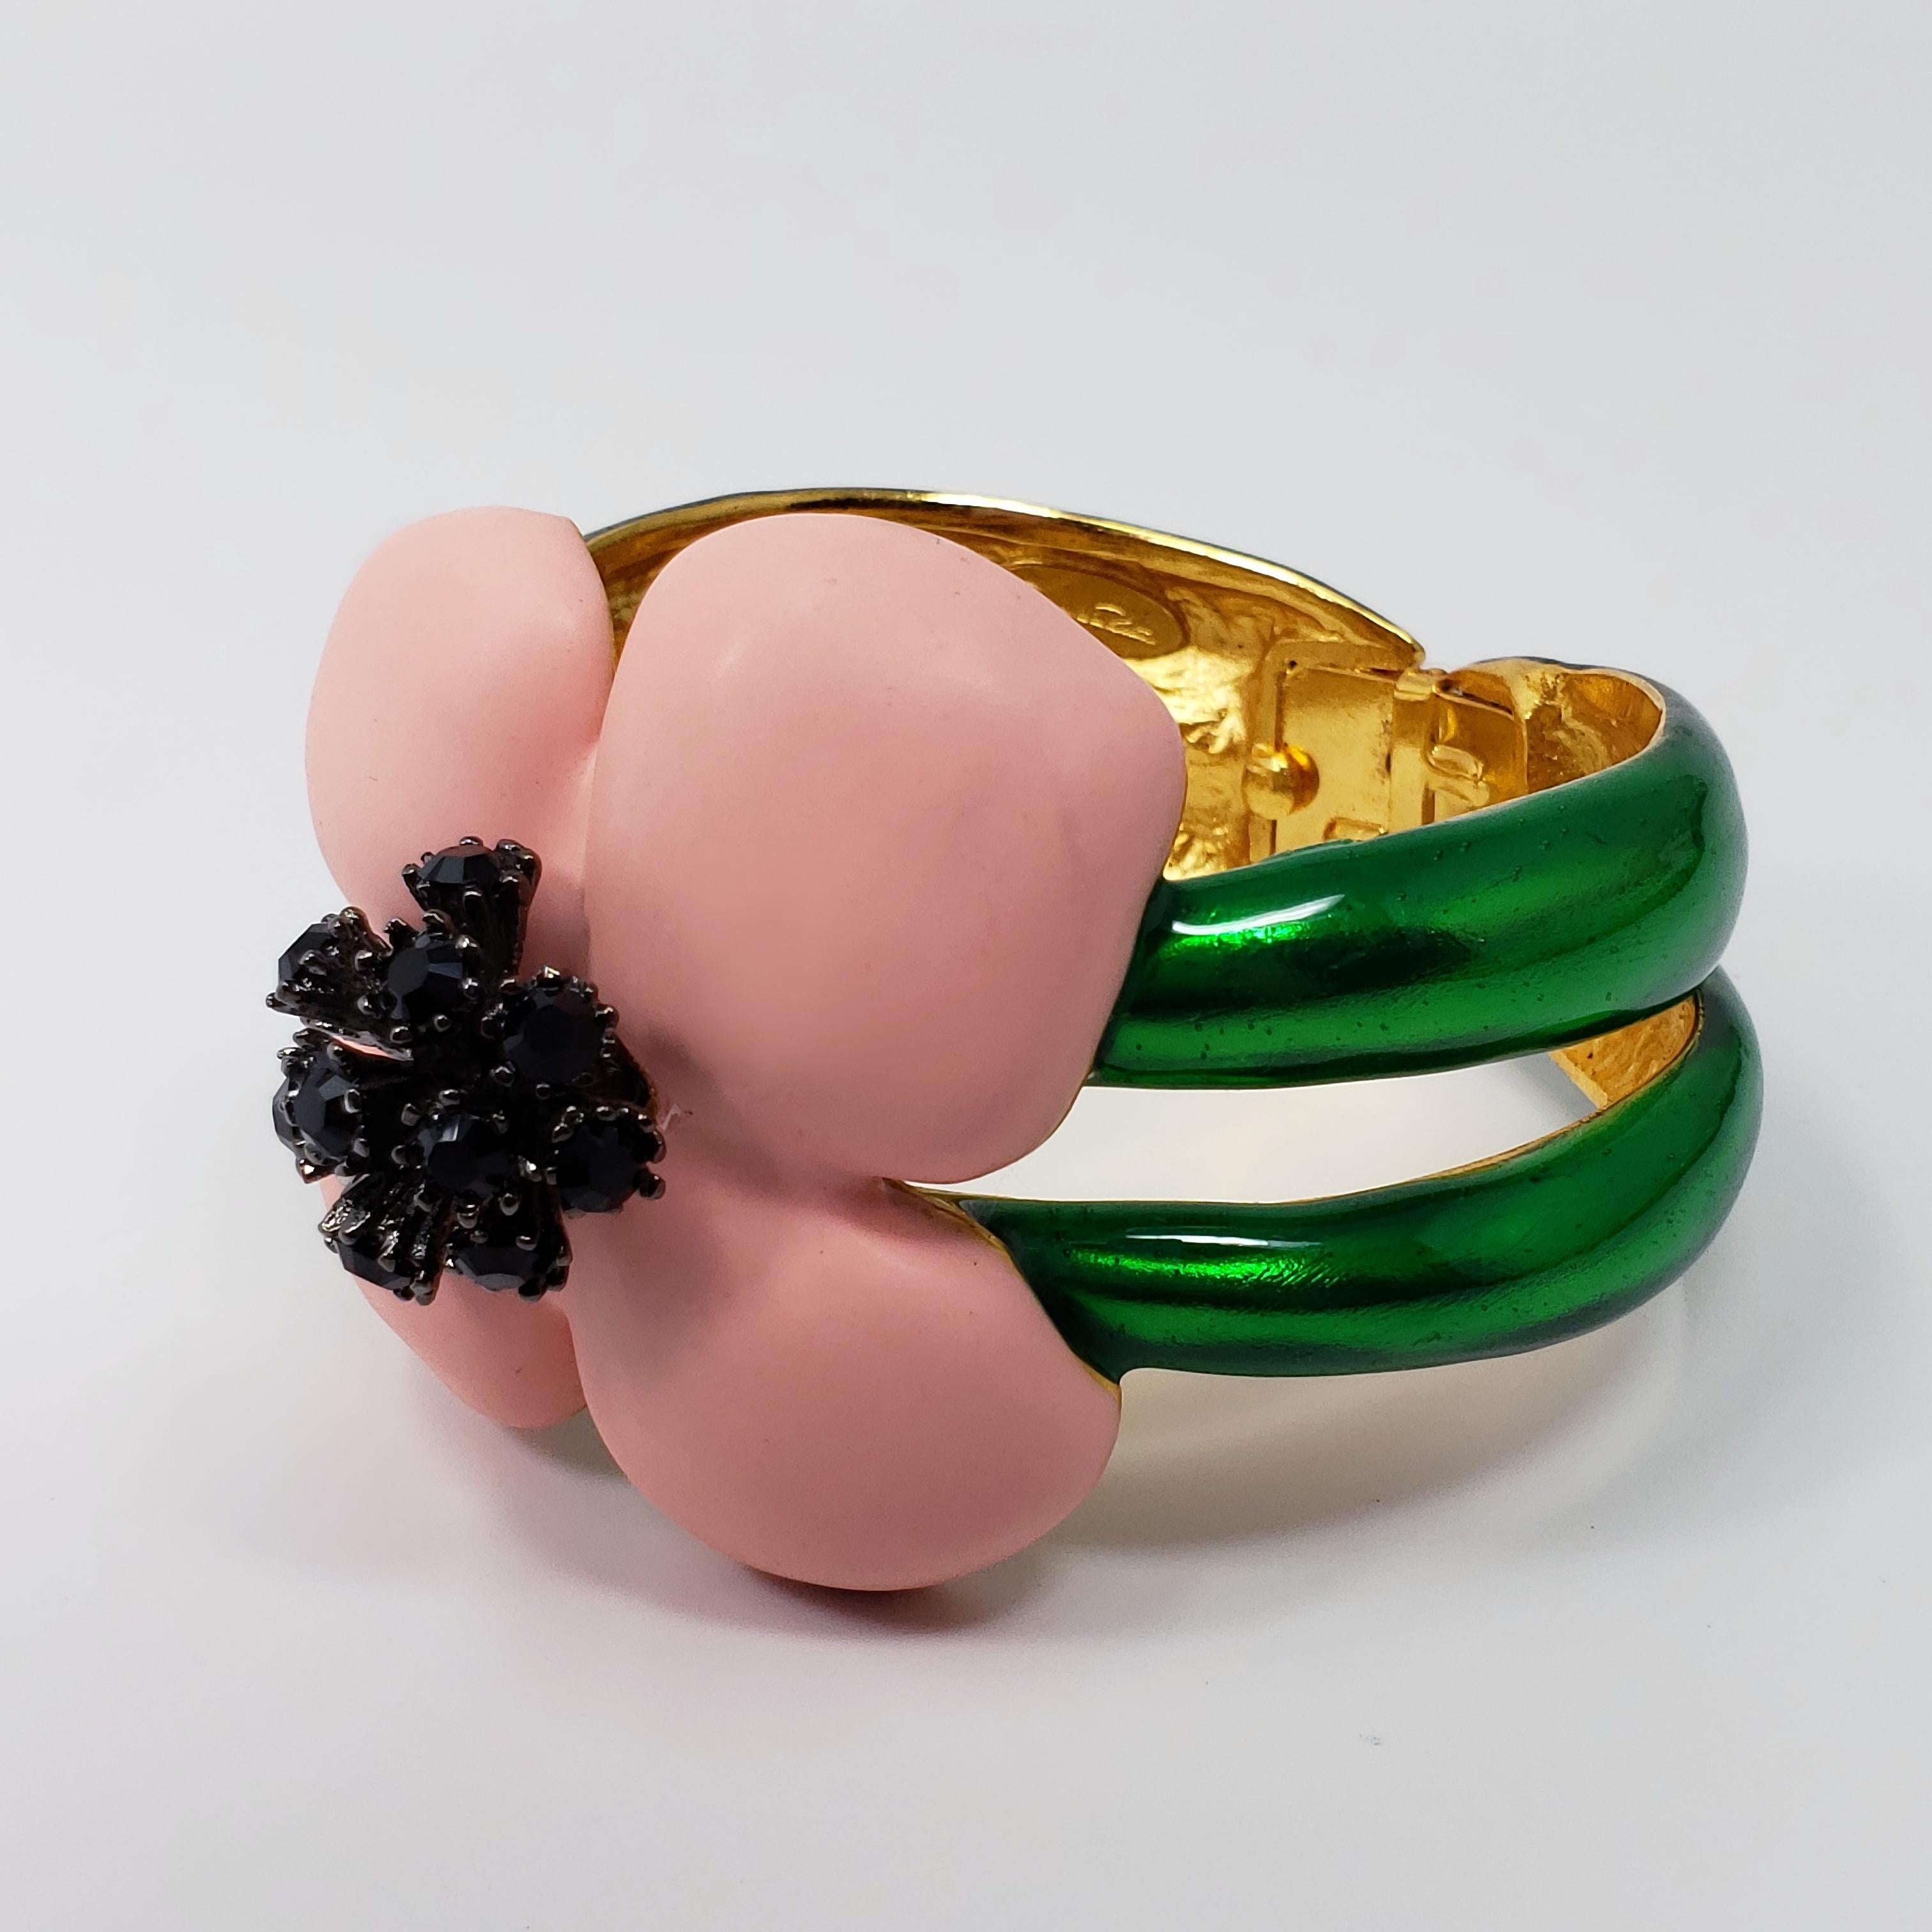 Blooming beauty! A charming bracelet from a rare Oscar de la Renta floral collection. The flower features soft pink resin petals on a painted green setting. The jet black crystals add striking contrast to the bright and colorful